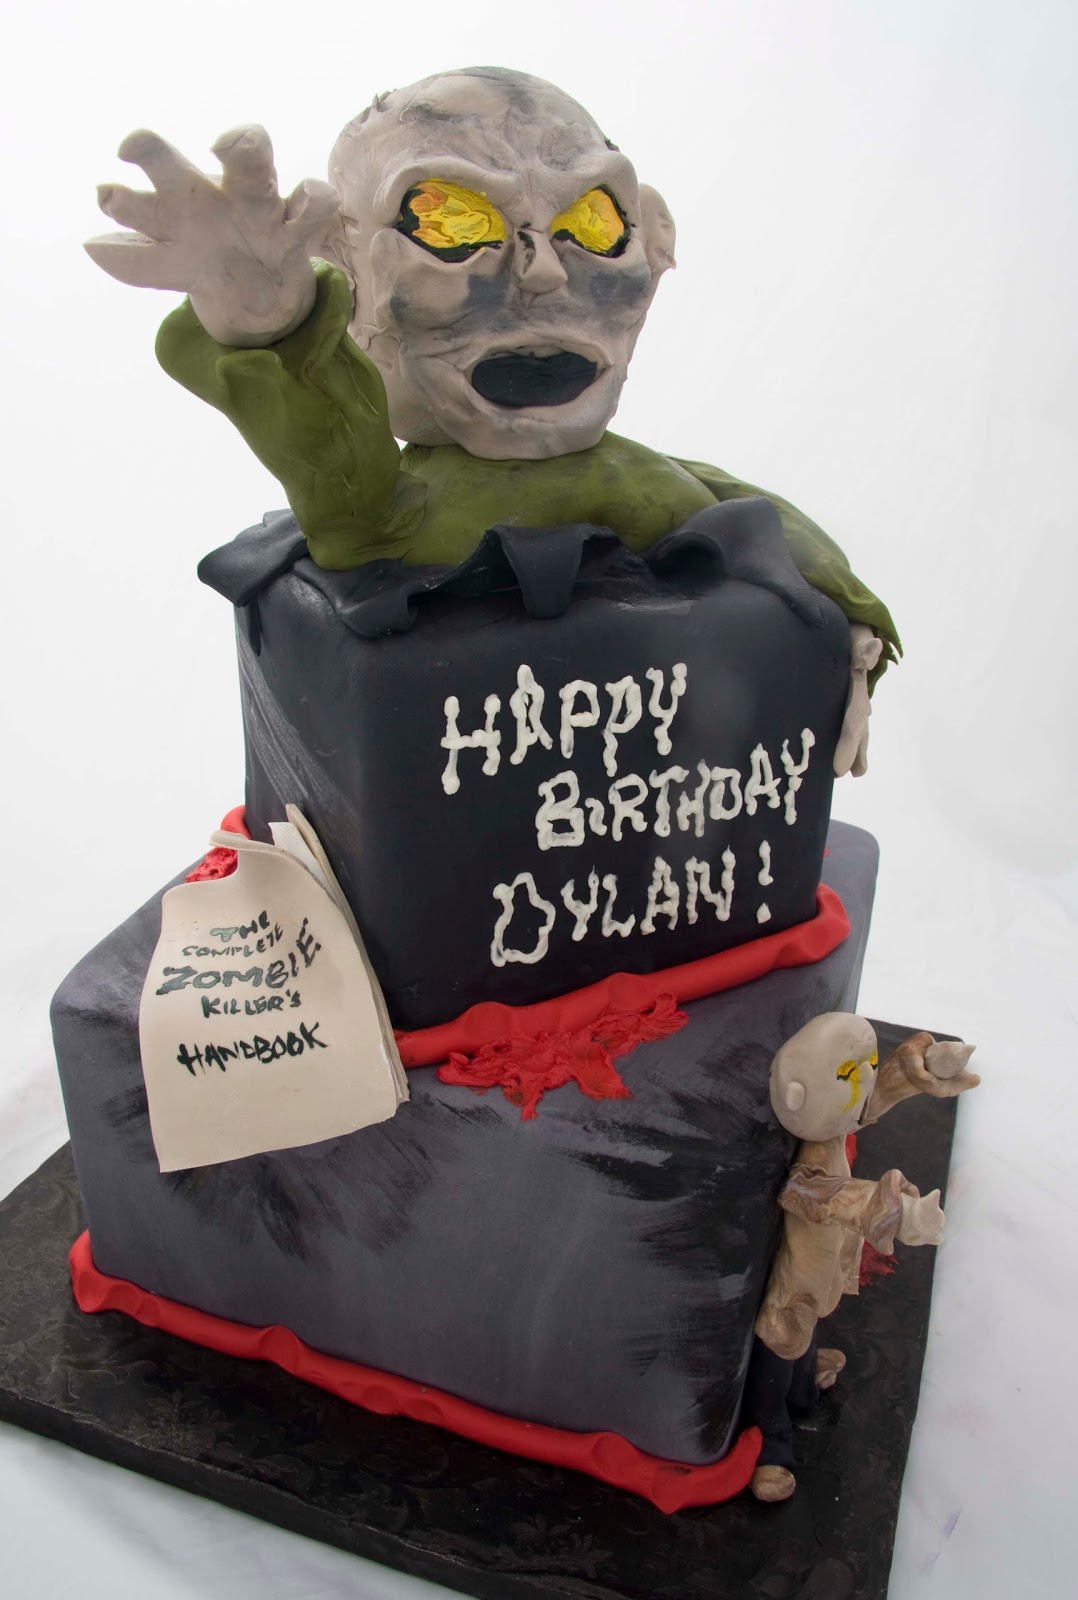 halloween zombie cakes Posted by The Crimson Cake at 5:16 PM